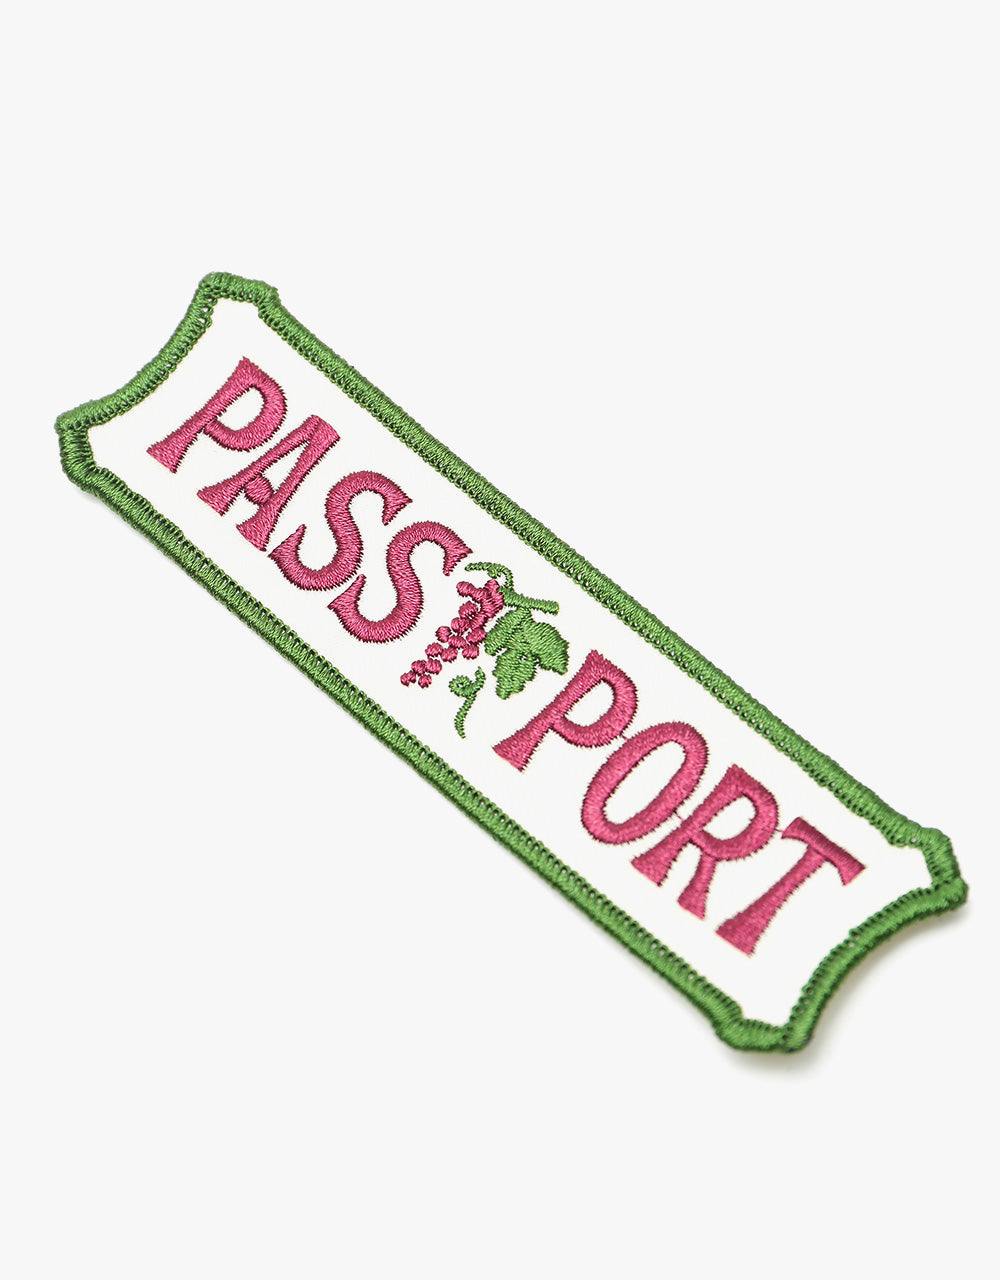 Pass Port Life Of Leisure Patch - Multi